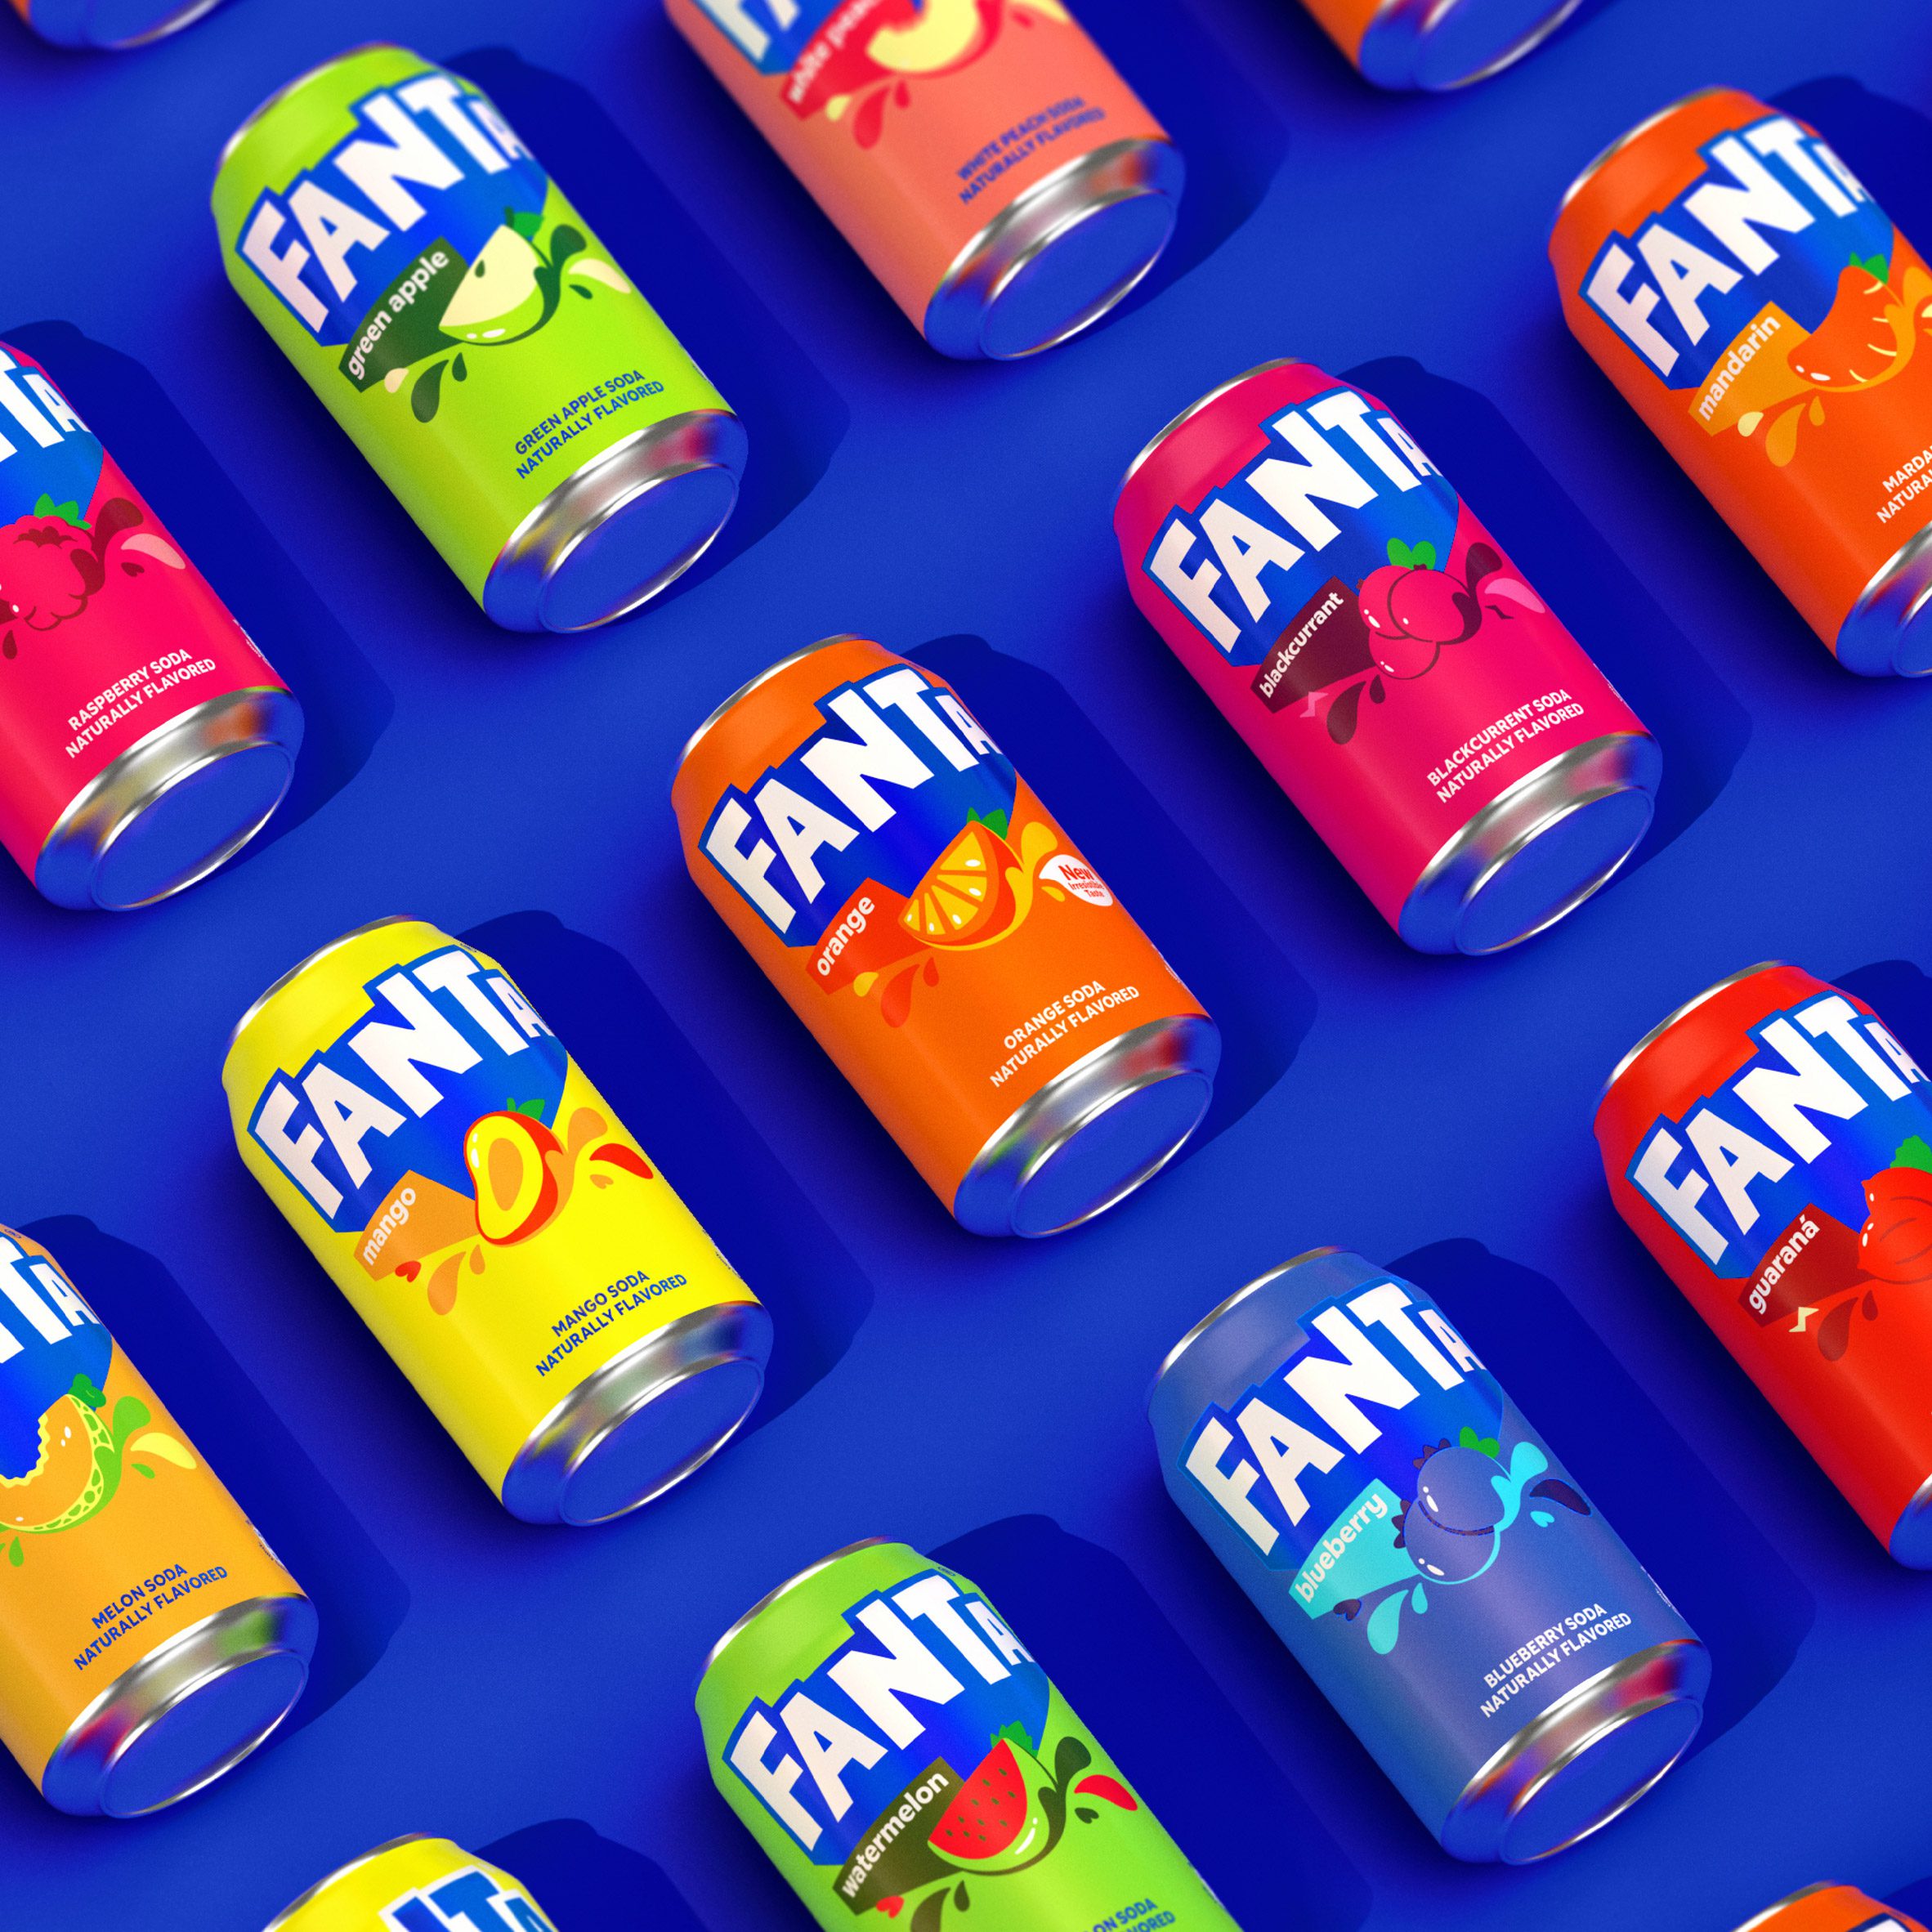 Fanta rebrands with truly playful universal identity